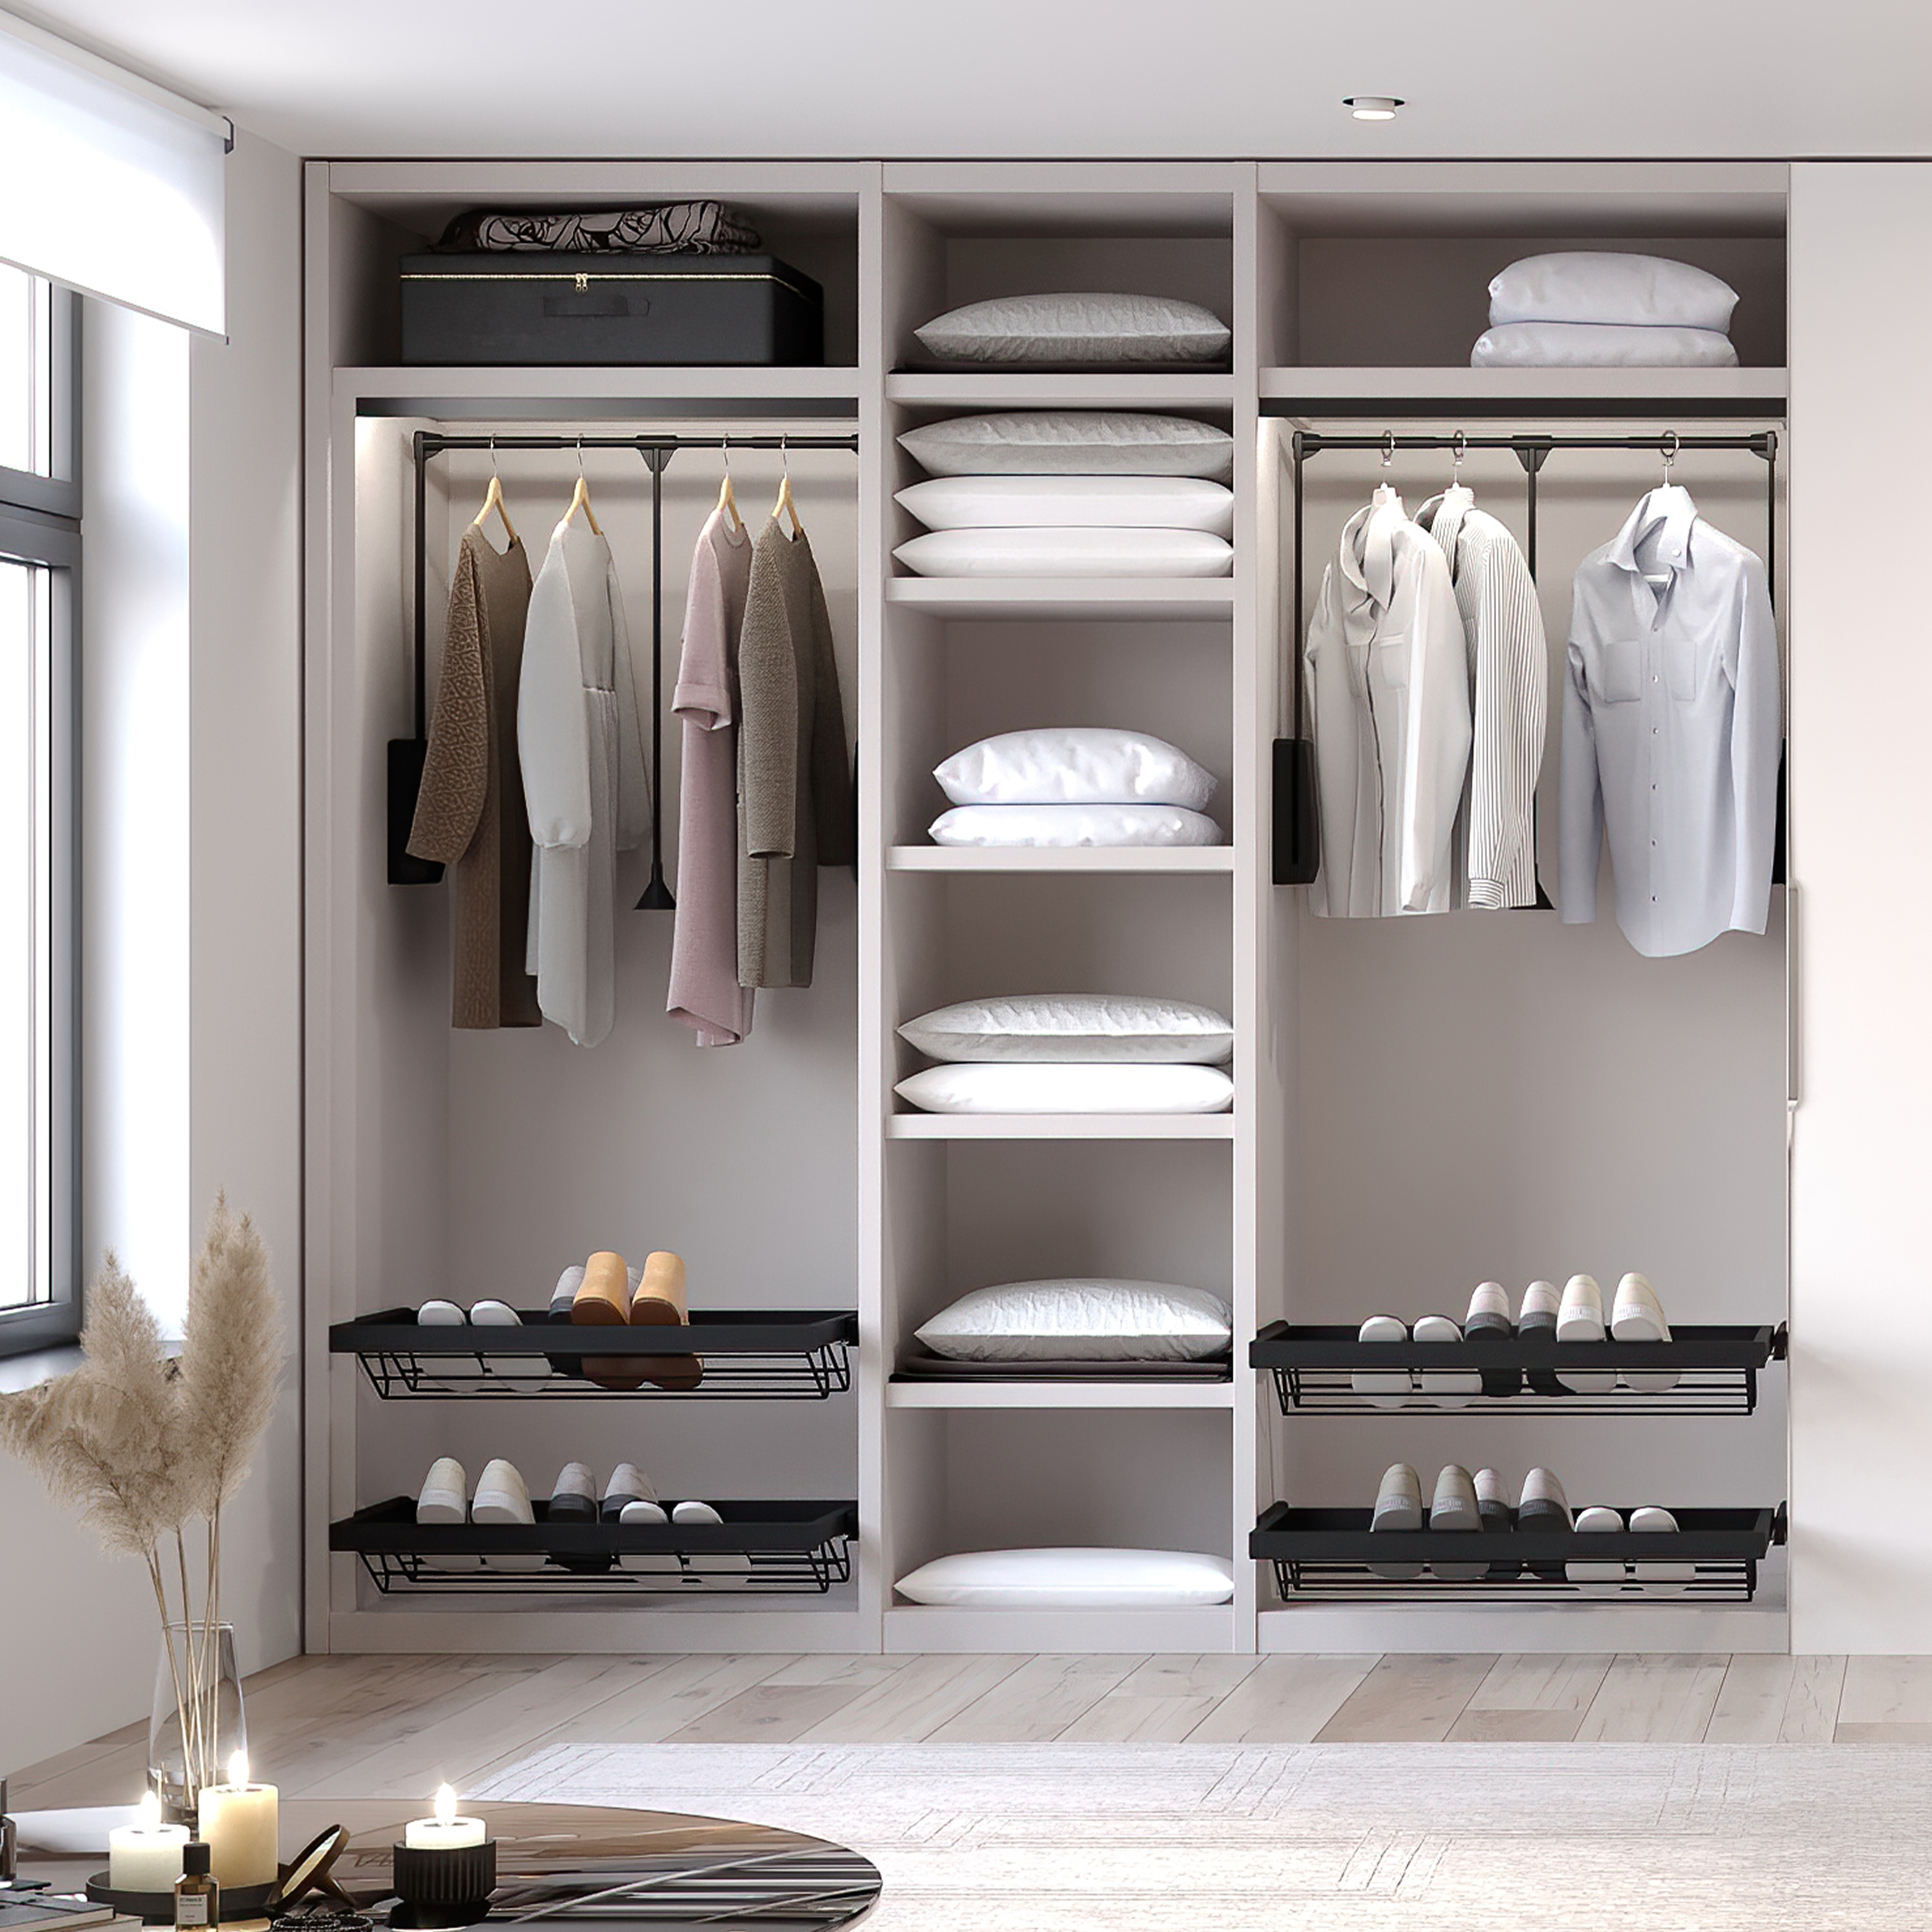 Pull Down Wardrobe Clothes Hanging Rail 830-1150mm with 12kg load rating Lift 